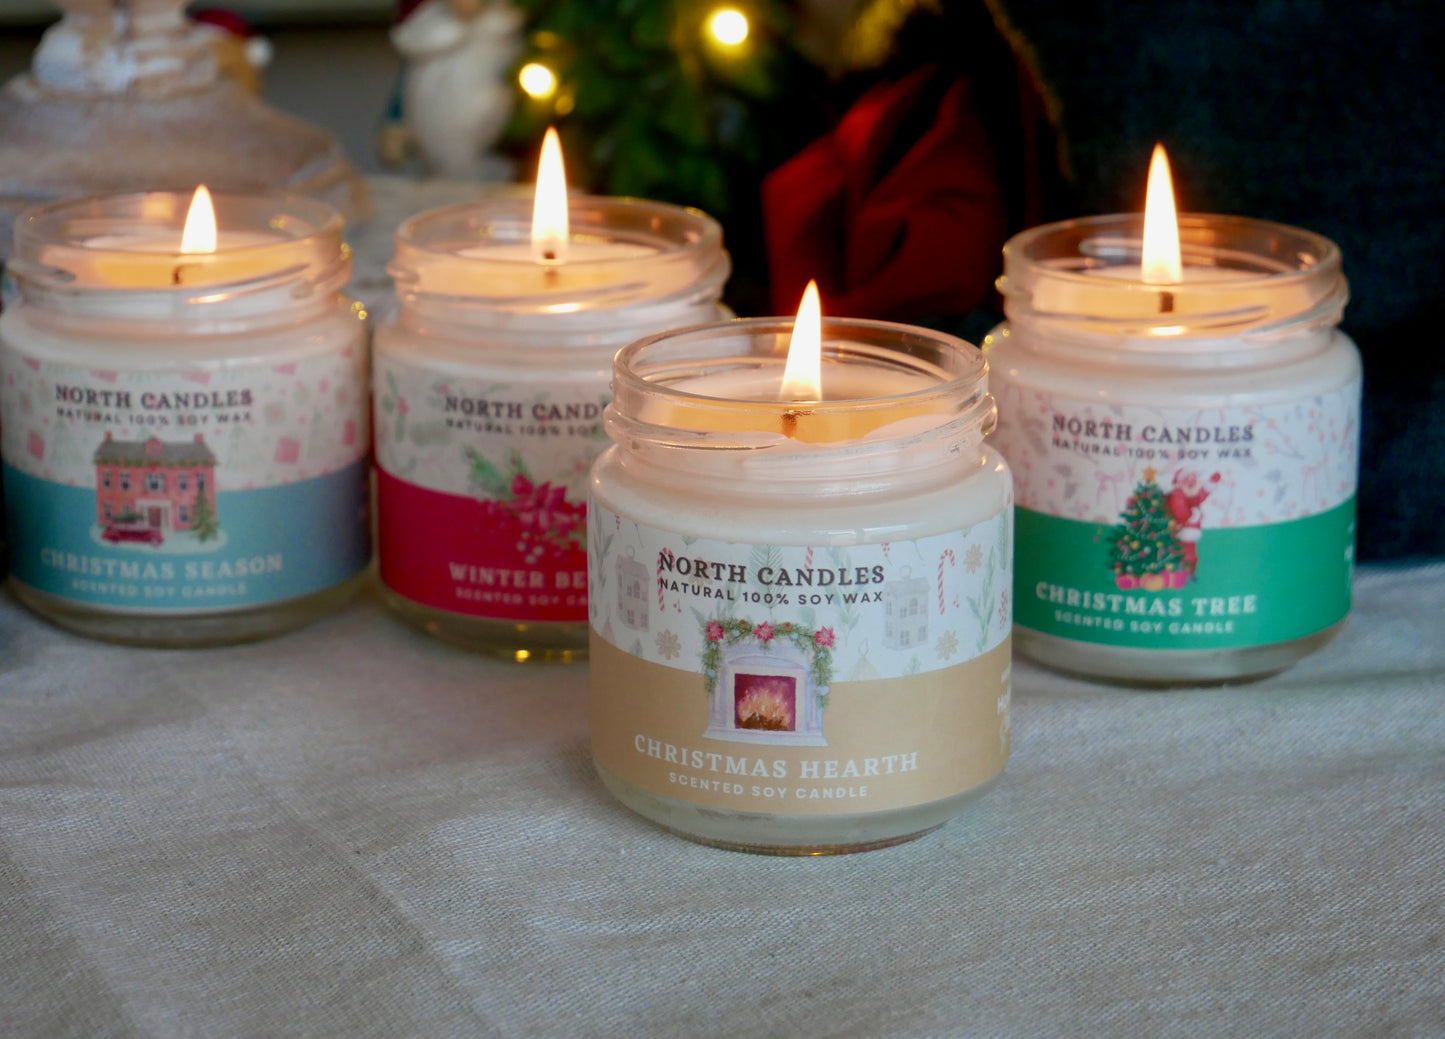 (Seasonal) Christmas Hearth Scented Soy Candle (SAVE 20% OFF!)